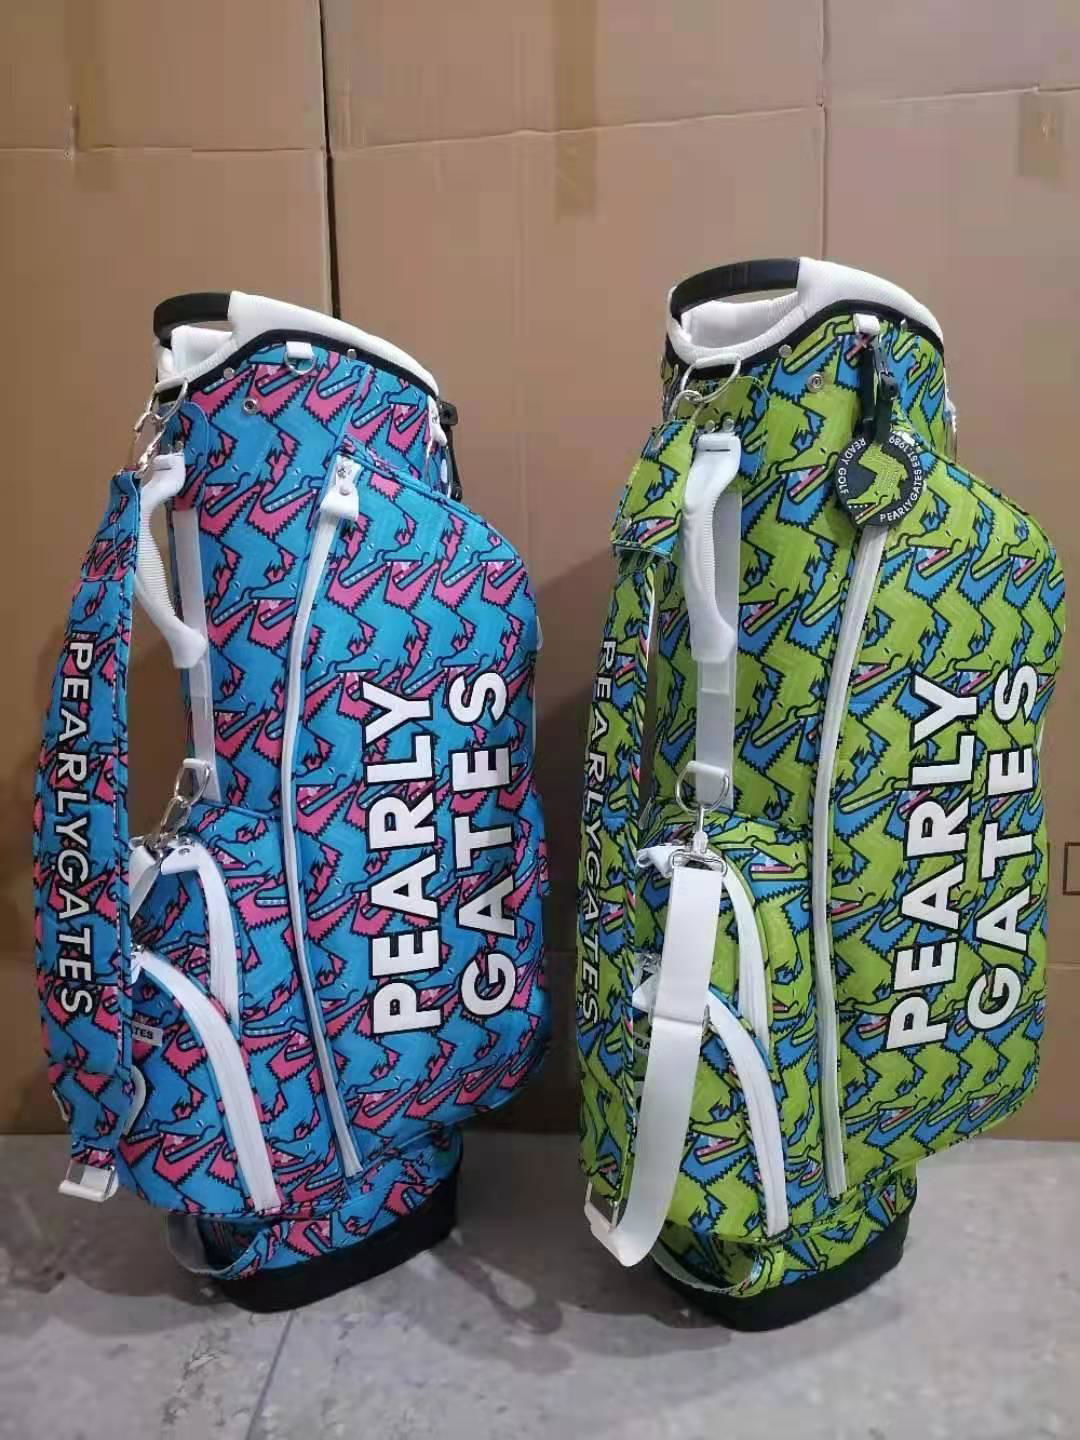 Smile pearly gates caddy package Golg bag